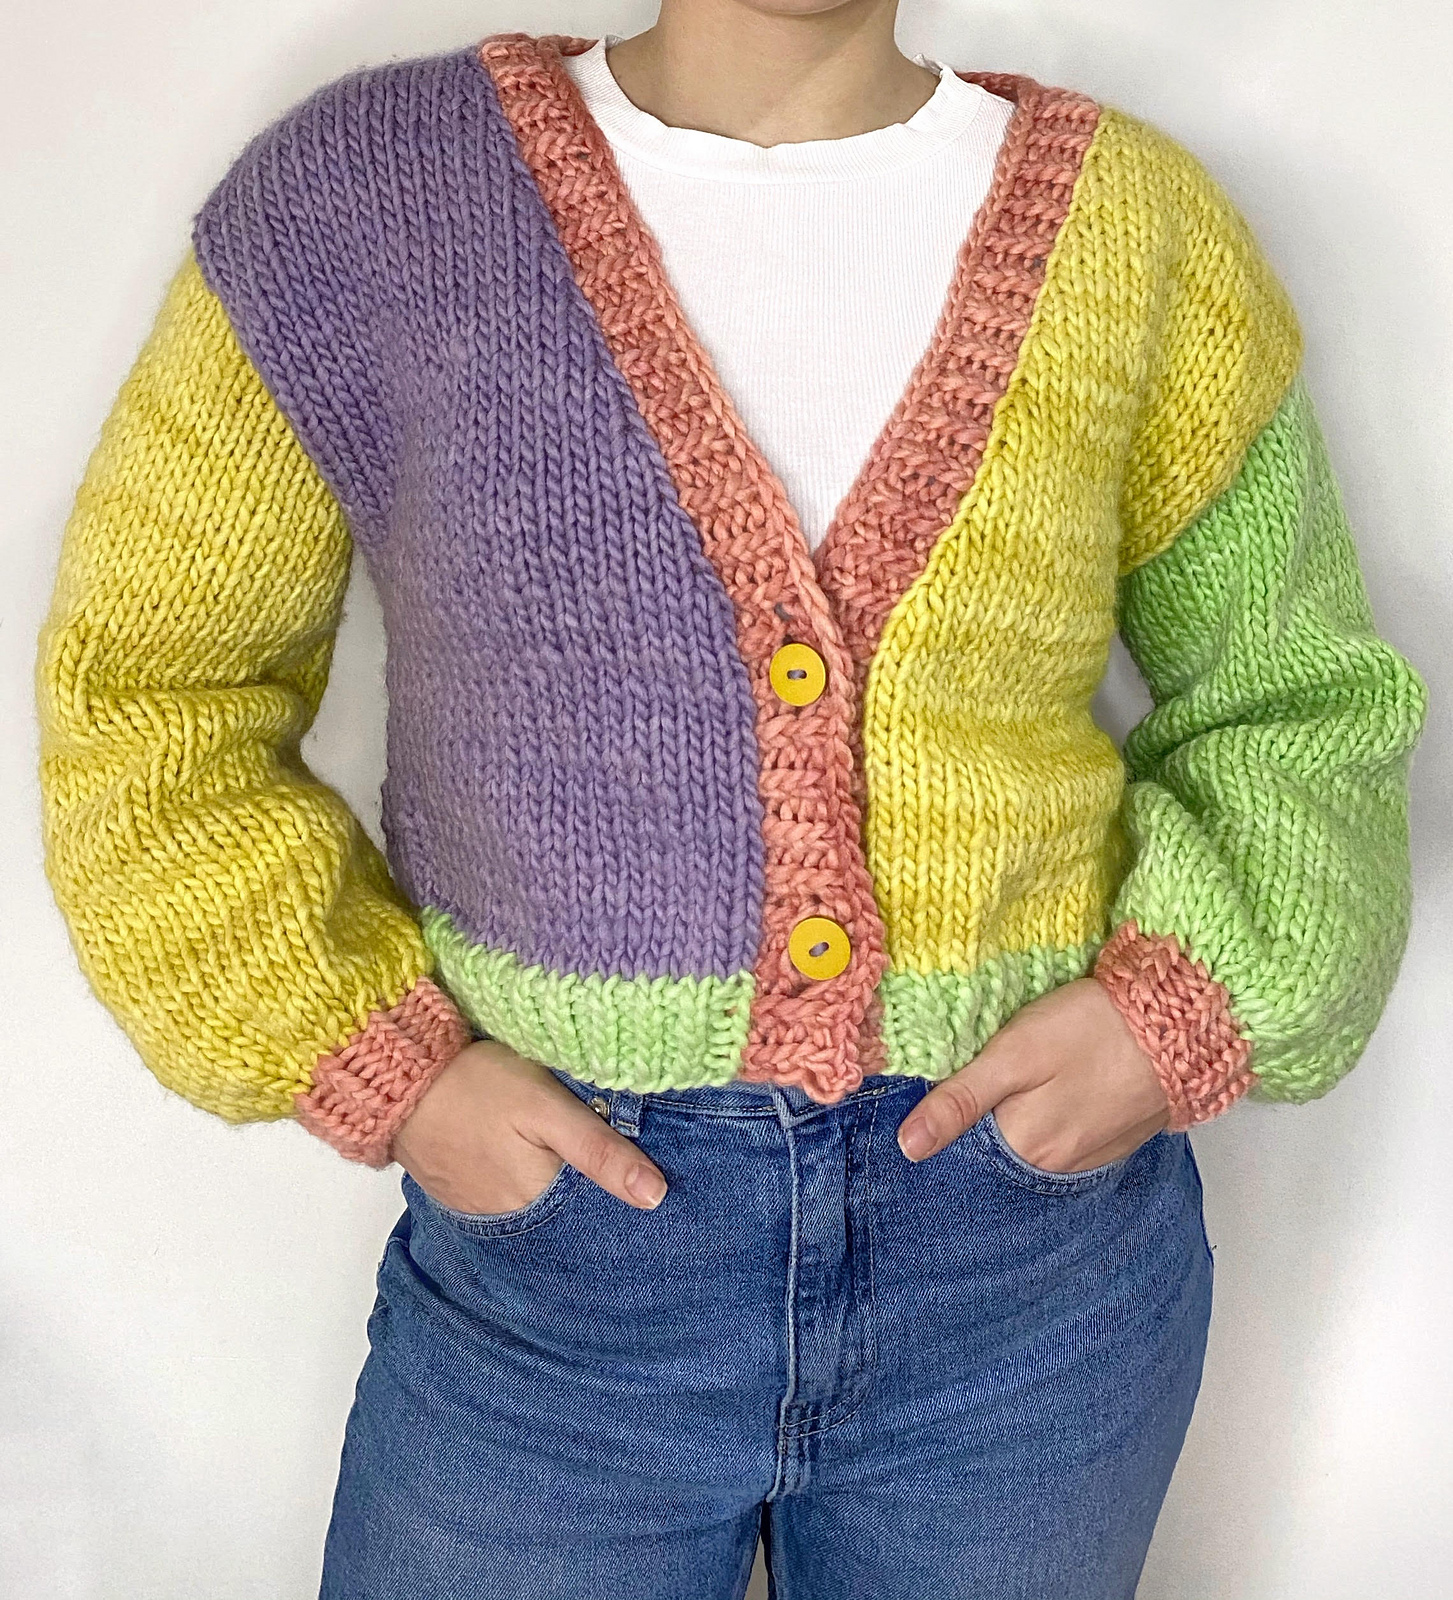 Knit a Miss Match Chunky Cardigan For Spring Or Have One Made!